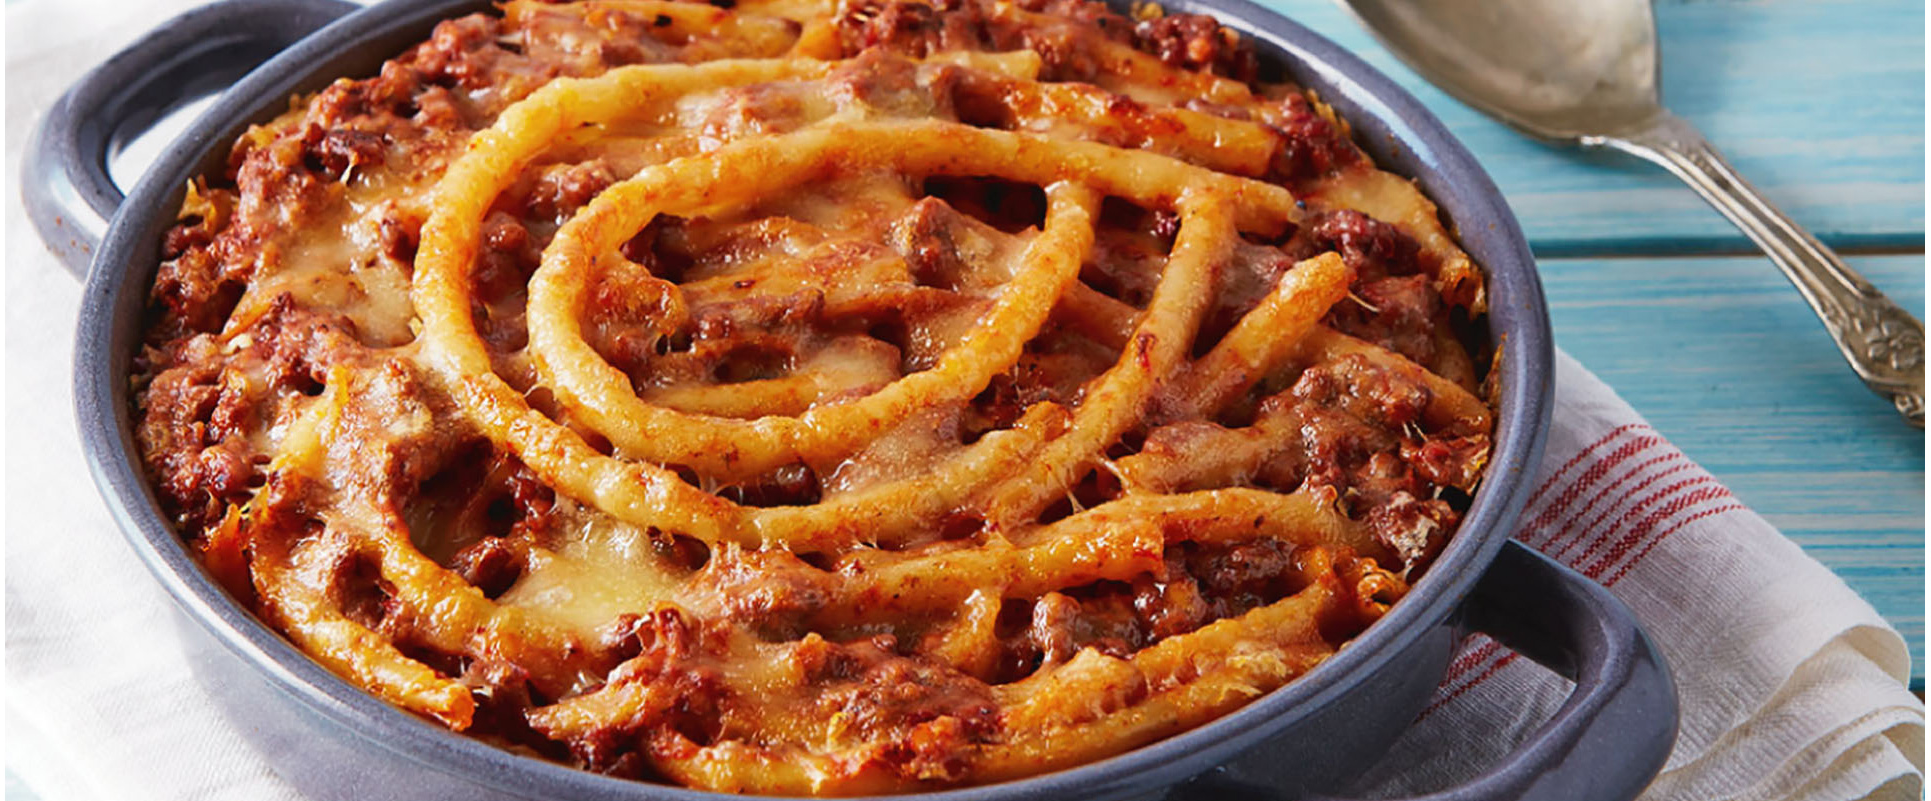 You are currently viewing Pasta skillet with meat